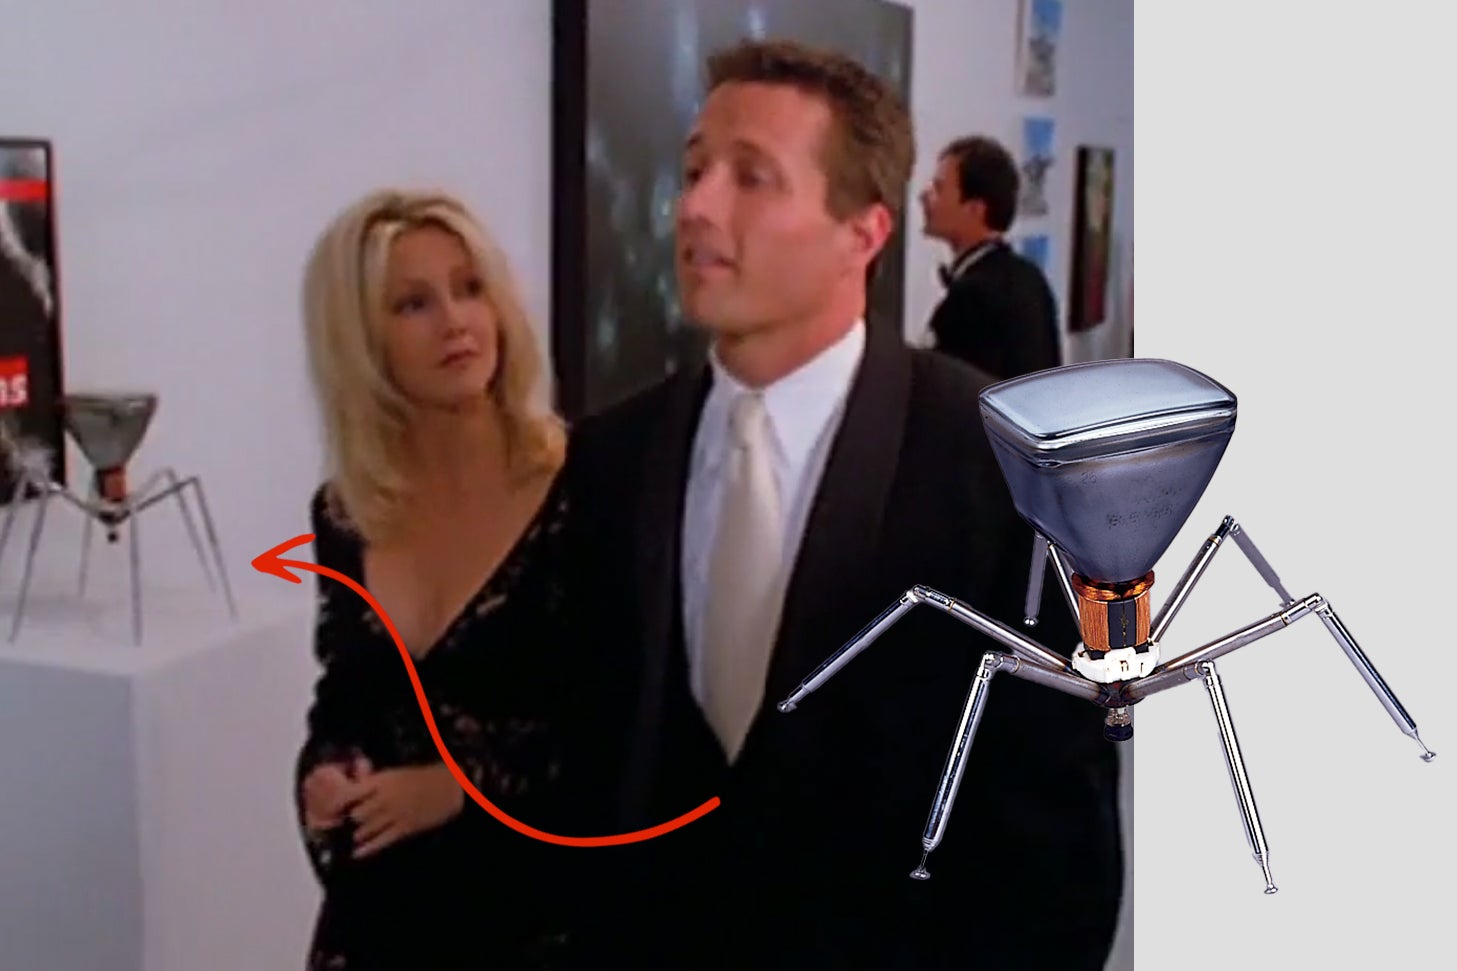 Two Melrose Place characters walk through an art gallery. Behind them, a large sculpture of a virus made from a cathode-ray tube.